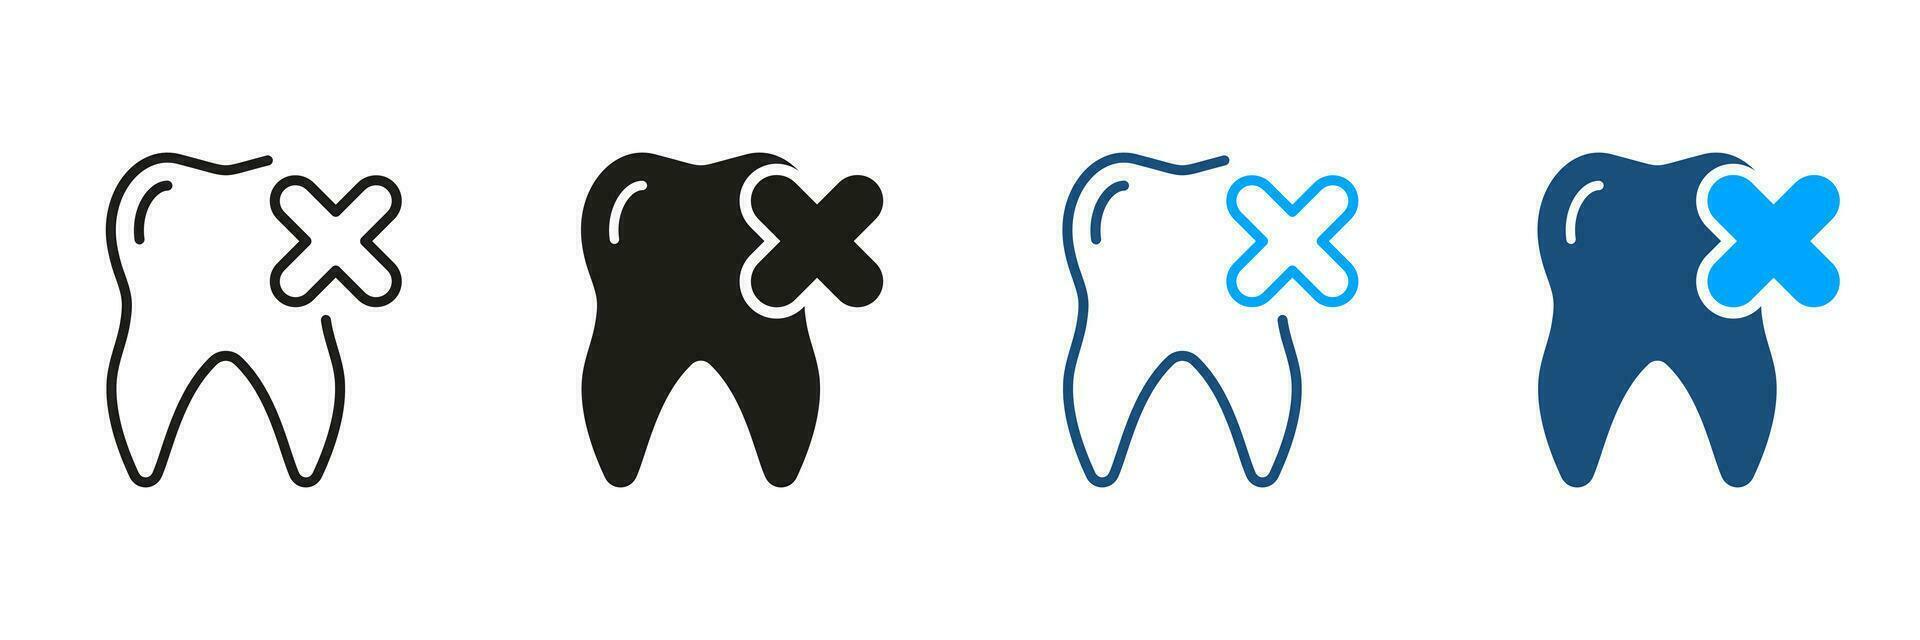 Tooth Removal Silhouette and Line Icon Set. Delete Dental Pain. Cancel Molar Teeth Pictogram. Medical Oral Care Black Symbol Collection. Dental Treatment Sign. Isolated Vector Illustration.